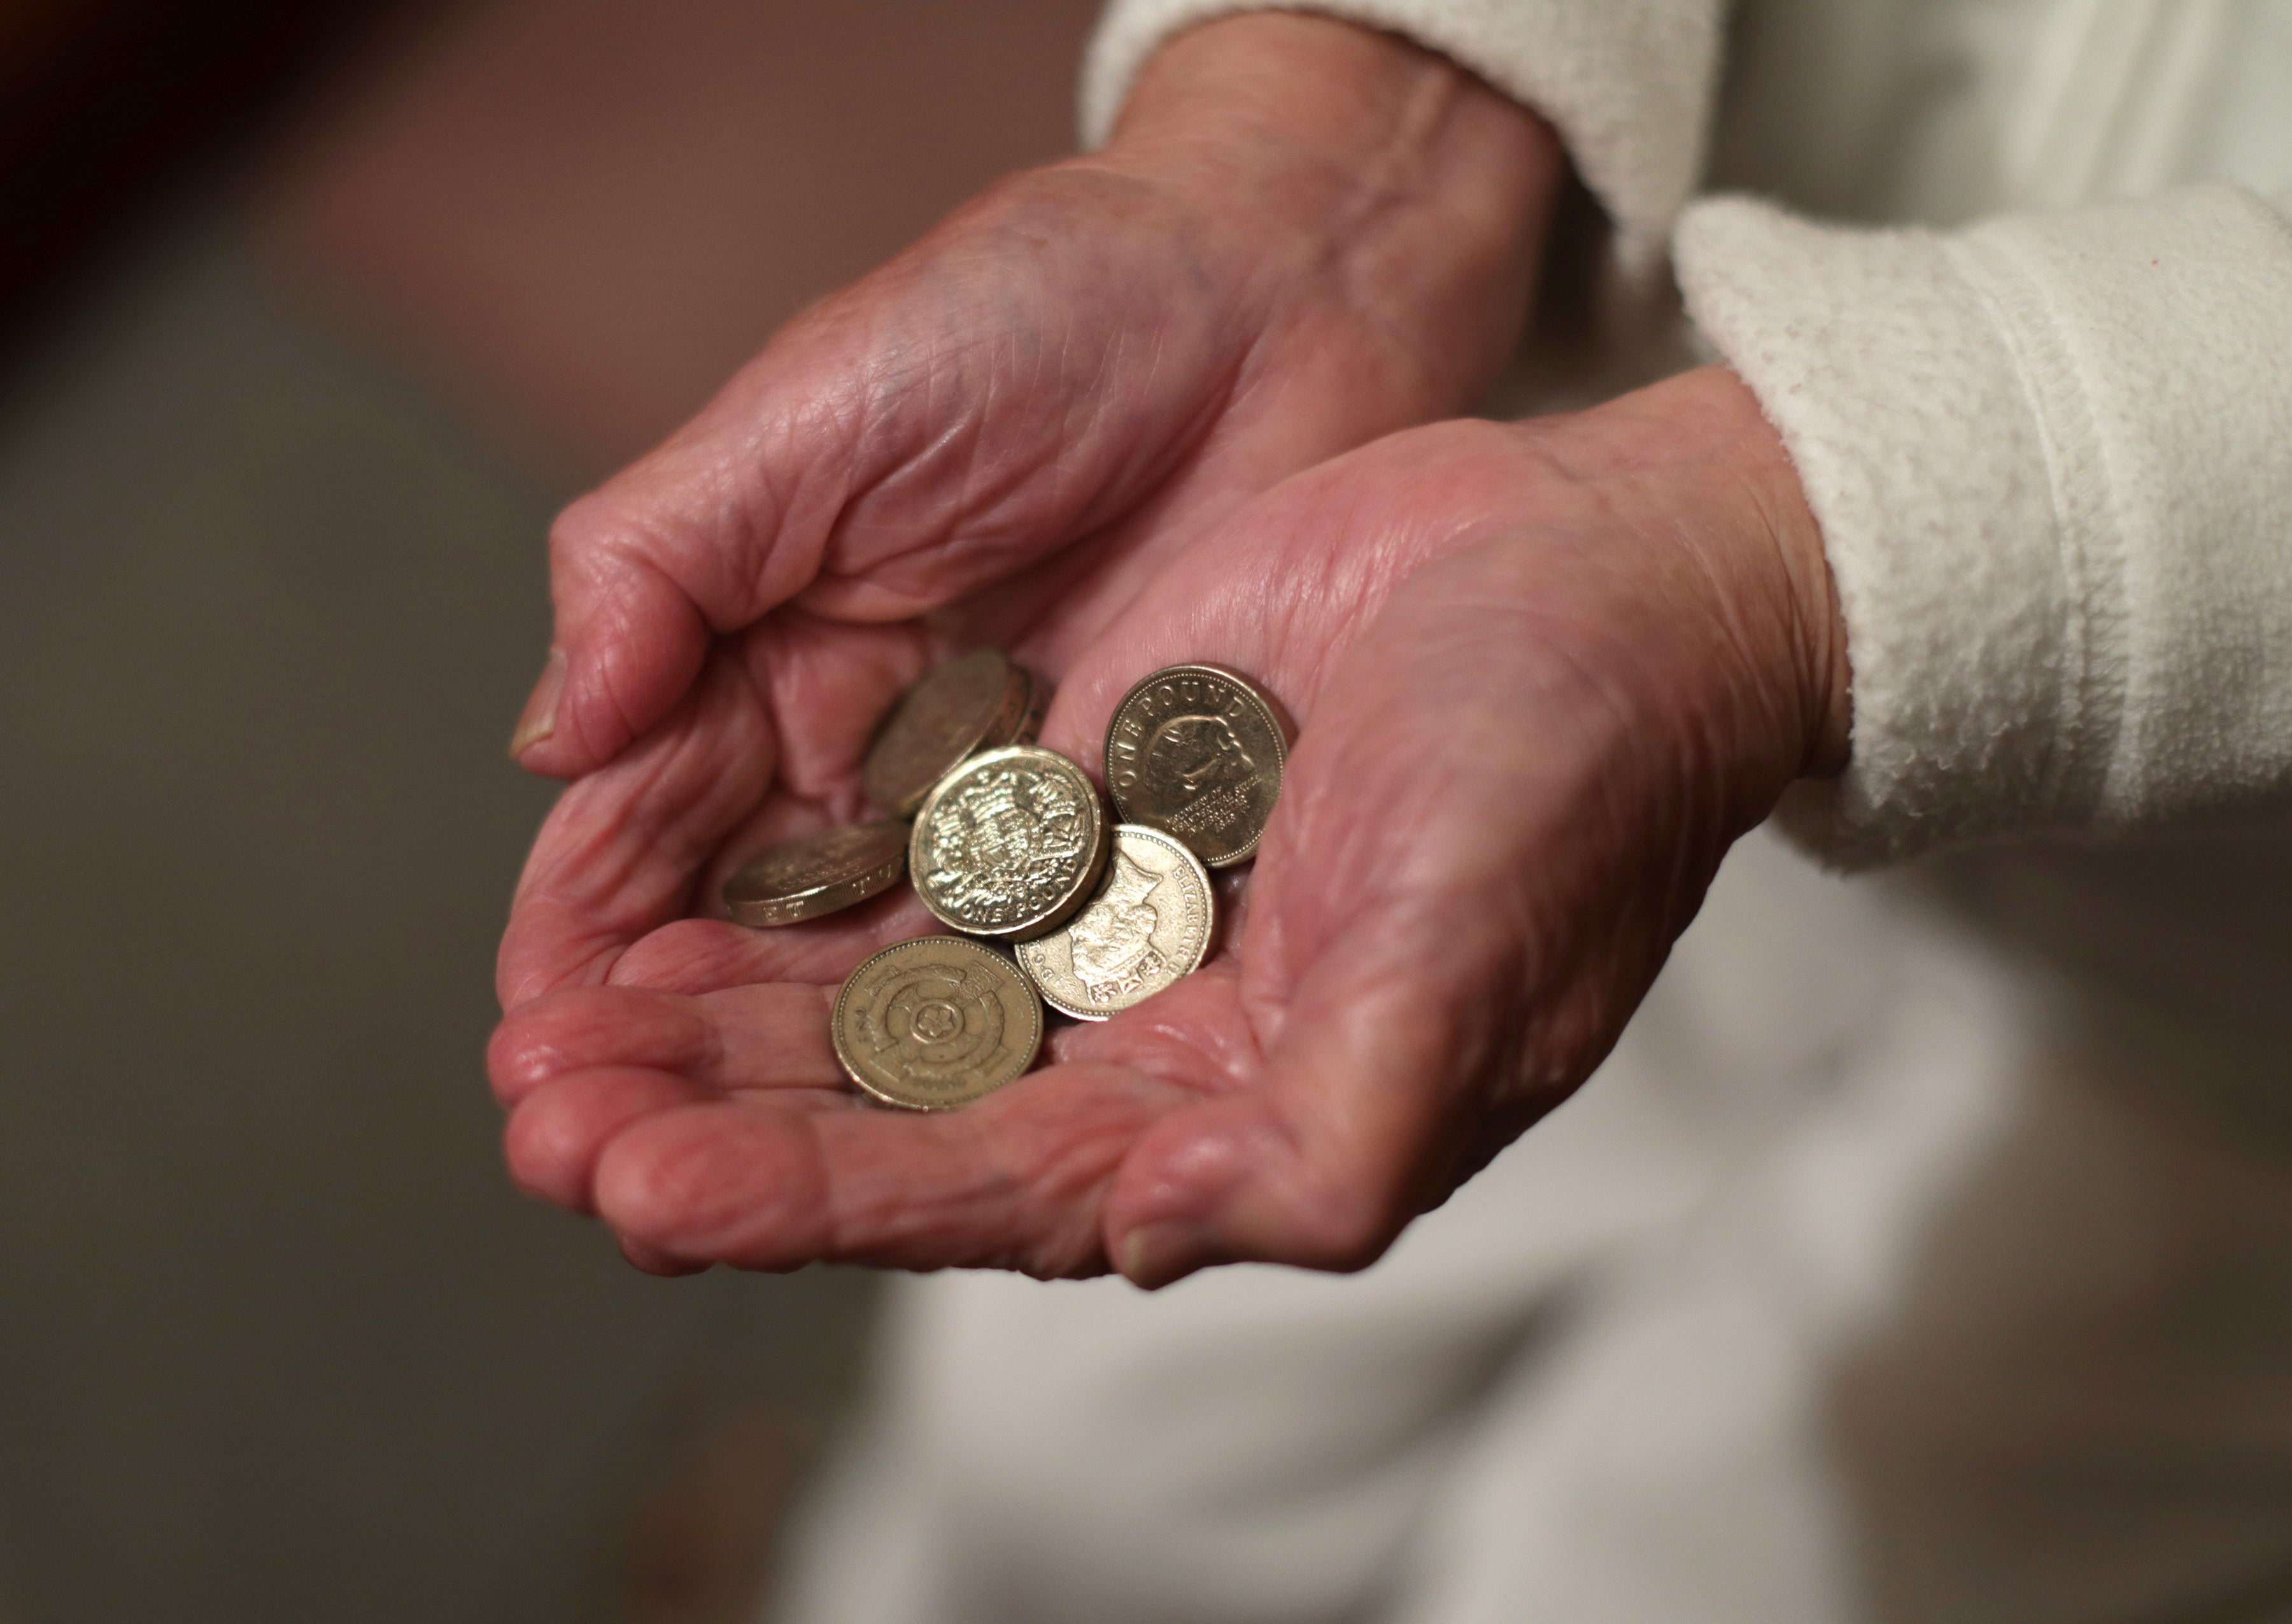 Some pensioners on final salary deals could be in for a nasty surprise as surging living costs outpace rises in their incomes, experts have warned (Yui Mok/PA)